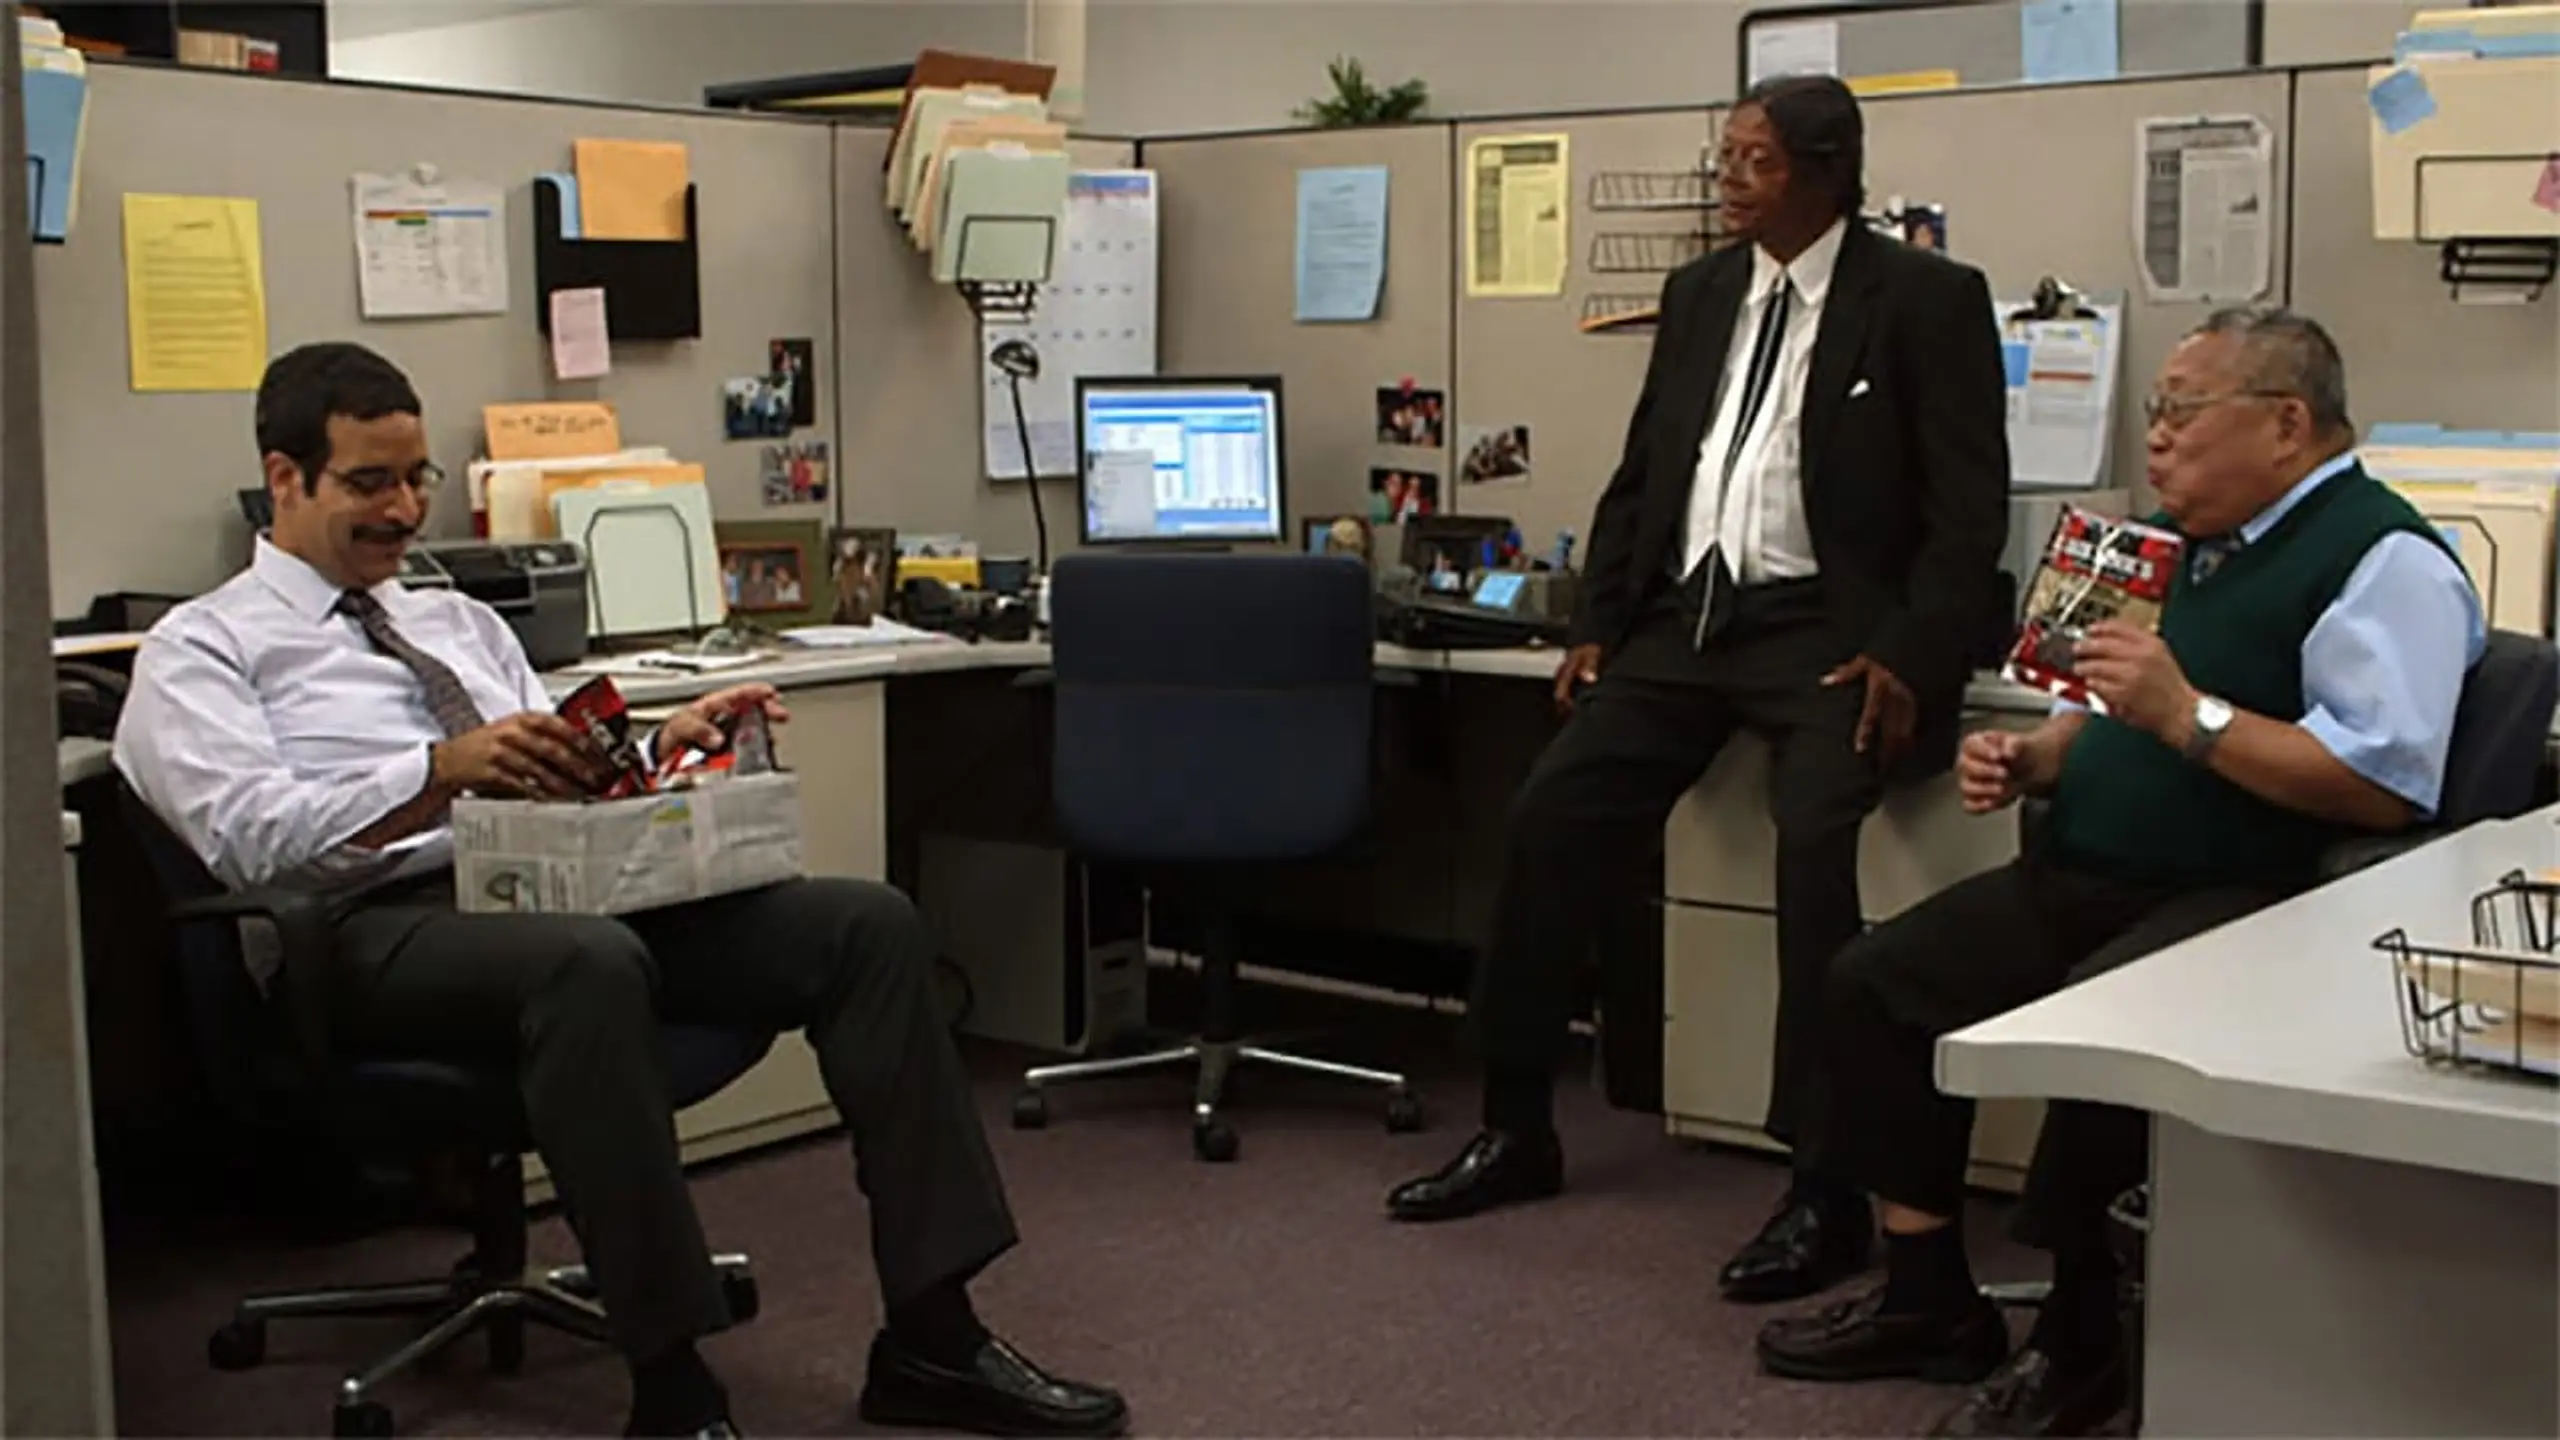 Workaholics: The Other Cubicle